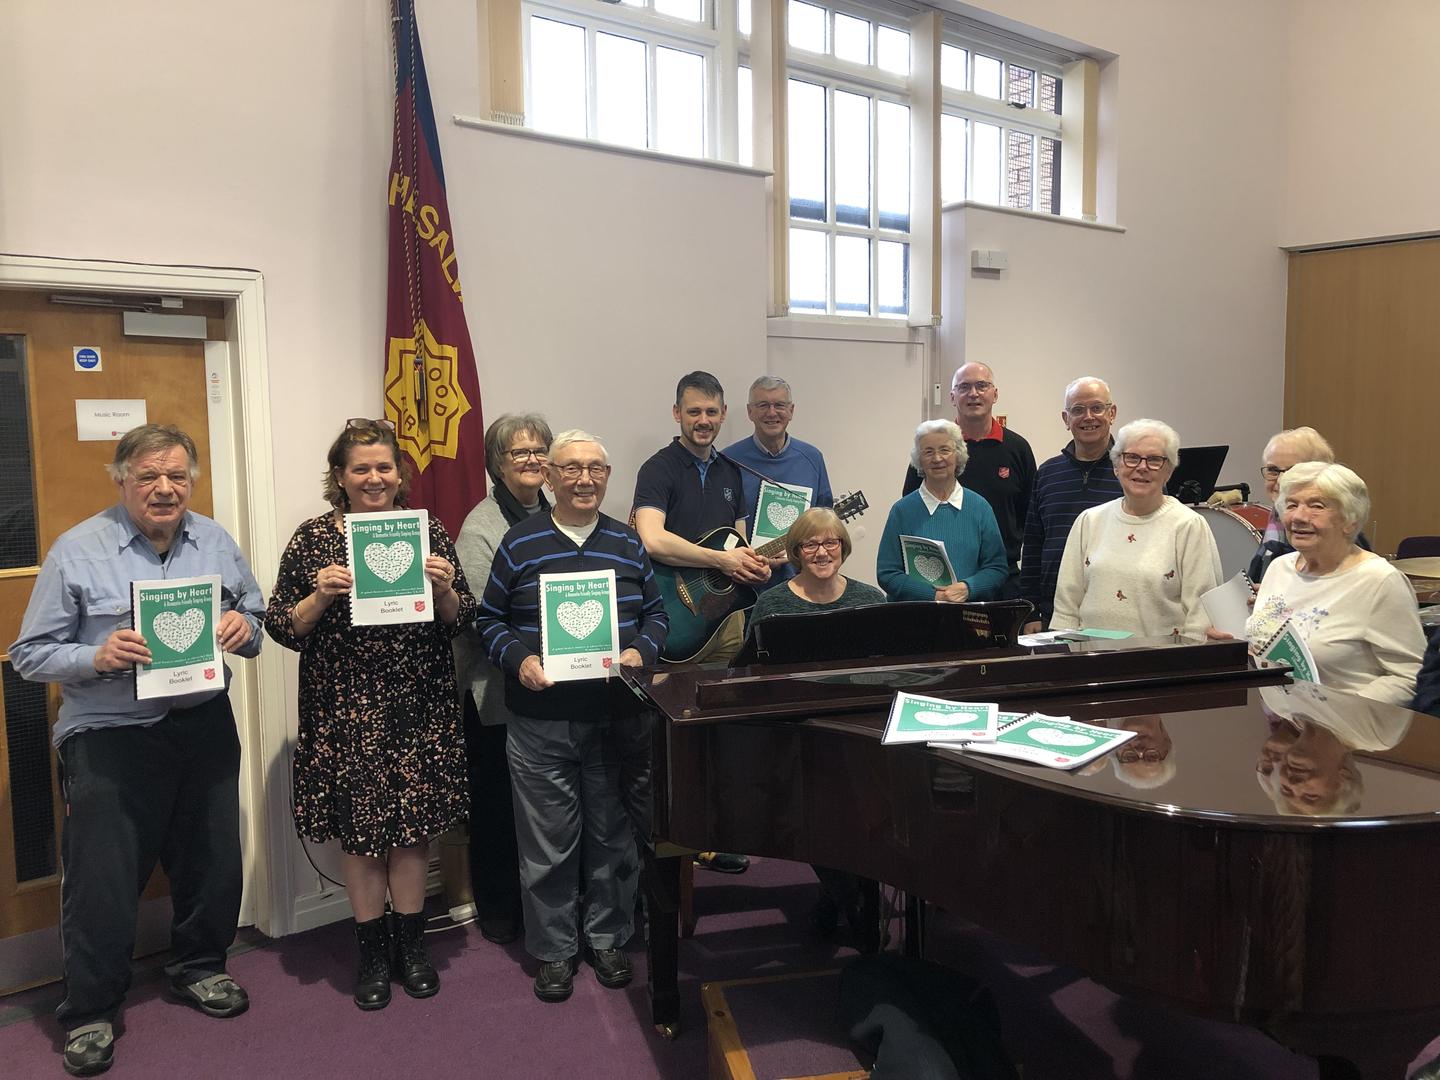 Singing by Heart launches in Liverpool